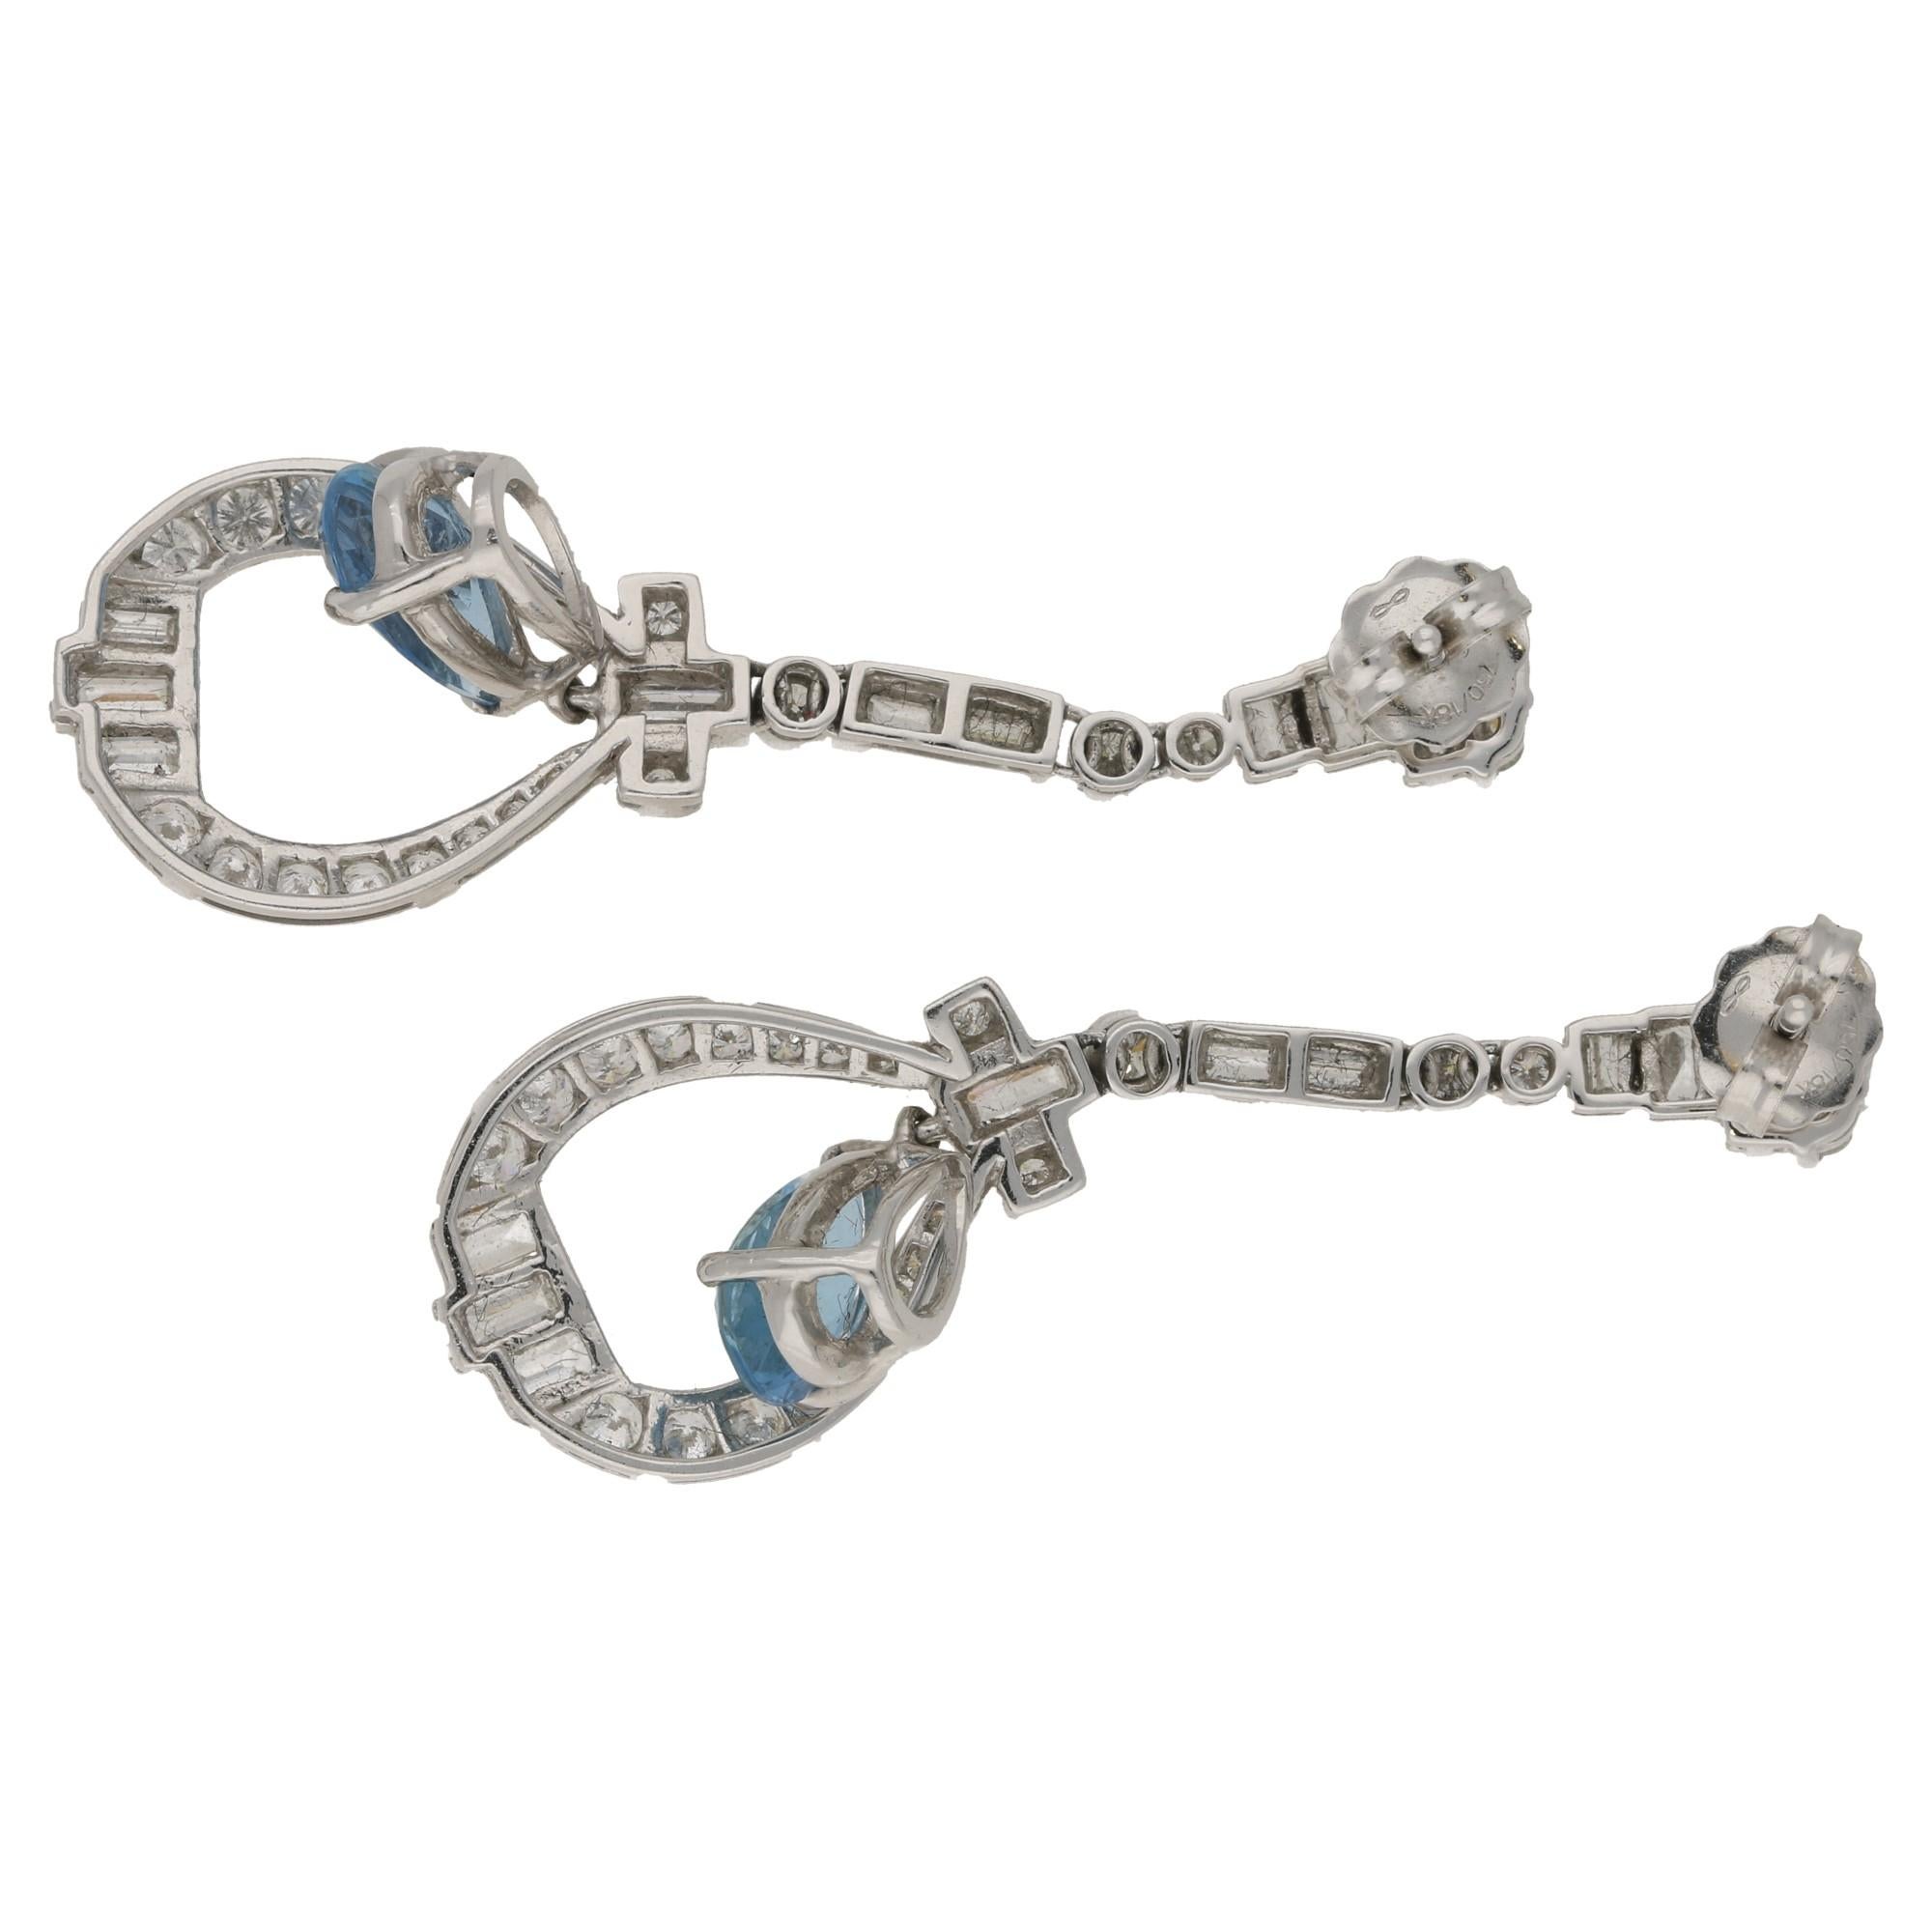  A stunning pair of platinum Art Deco style aquamarine and diamond drop earrings, featuring a mix of round brilliant and baguette cut diamonds in an elegant line from which a pear shaped aquamarine with a vivid sky blue colour measuring 8.9mm by